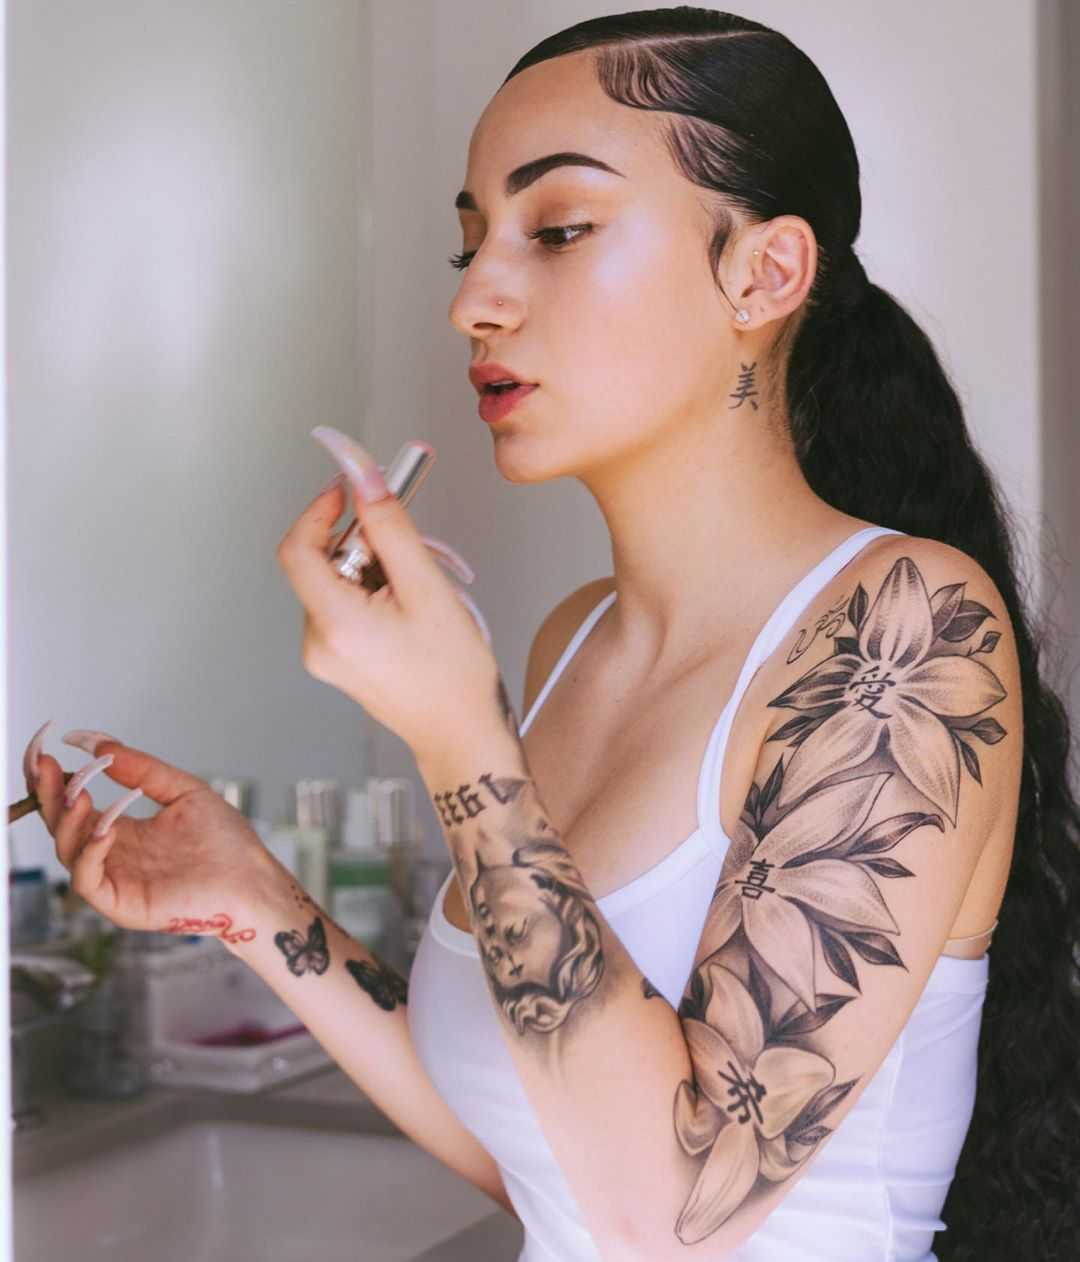 70+ Hot Pictures Of Danielle Bregoli aka Bhad Bhabie Which Will Win Your Heart 56